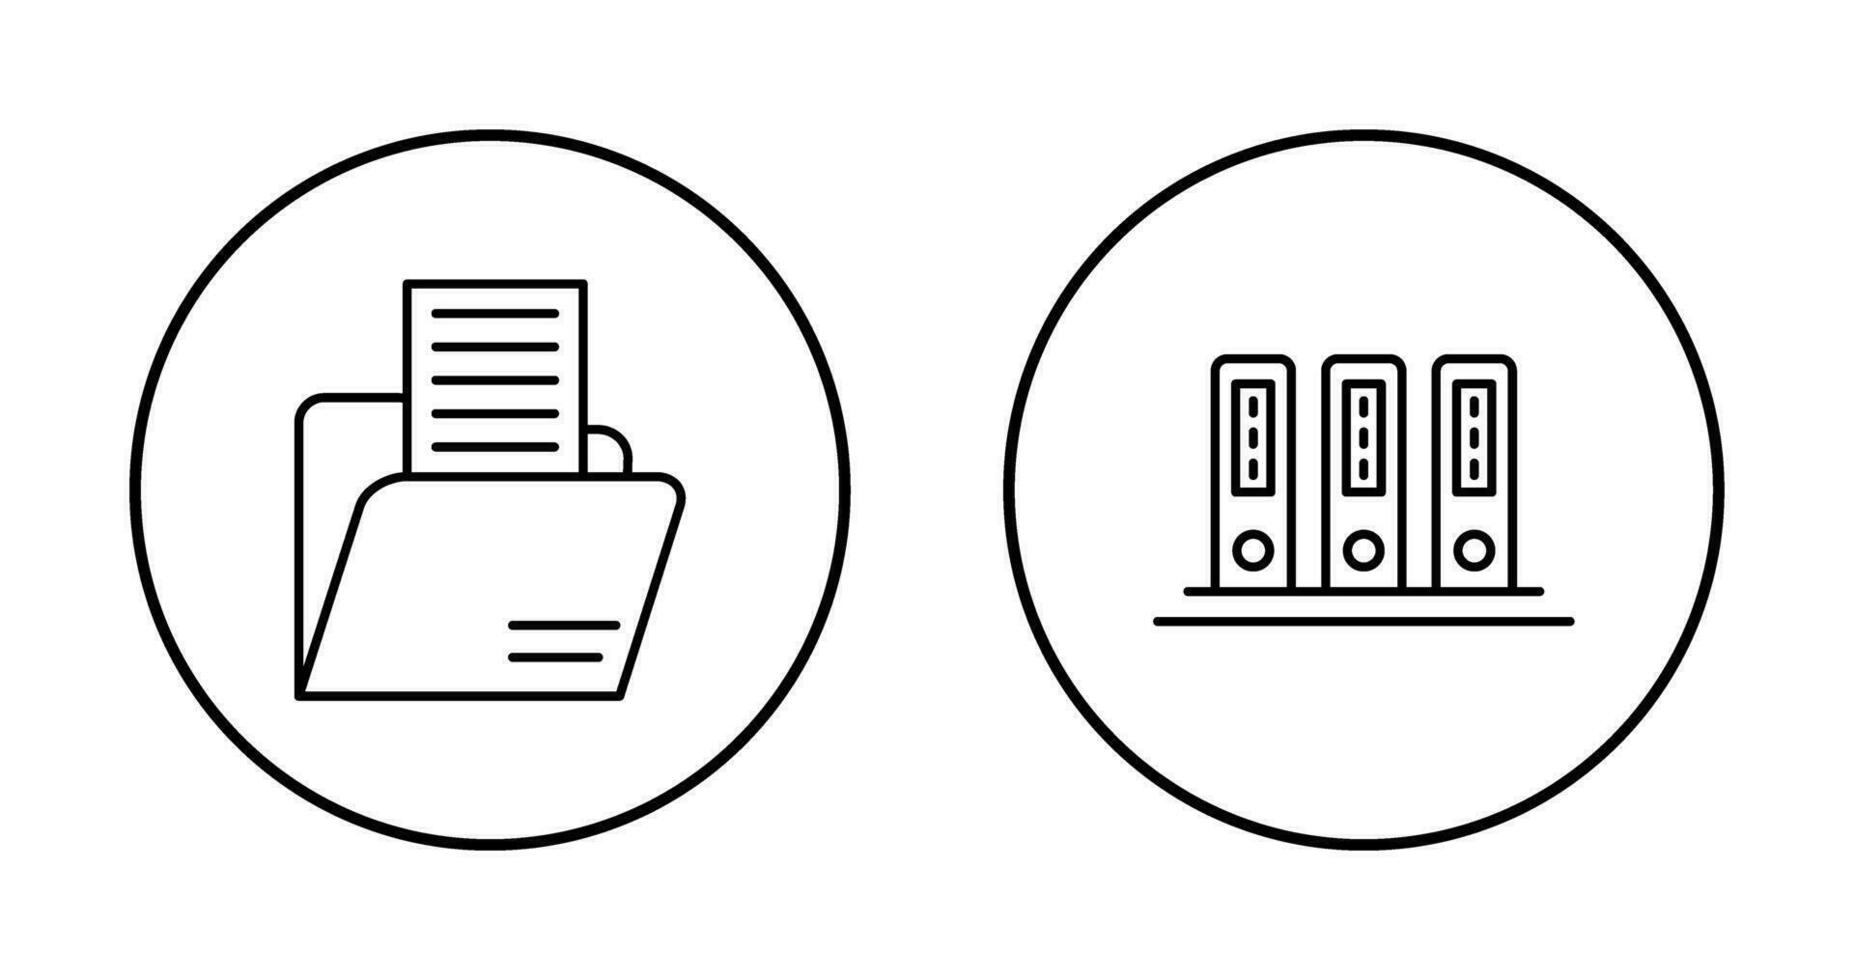 Folder and Office Files Icon vector